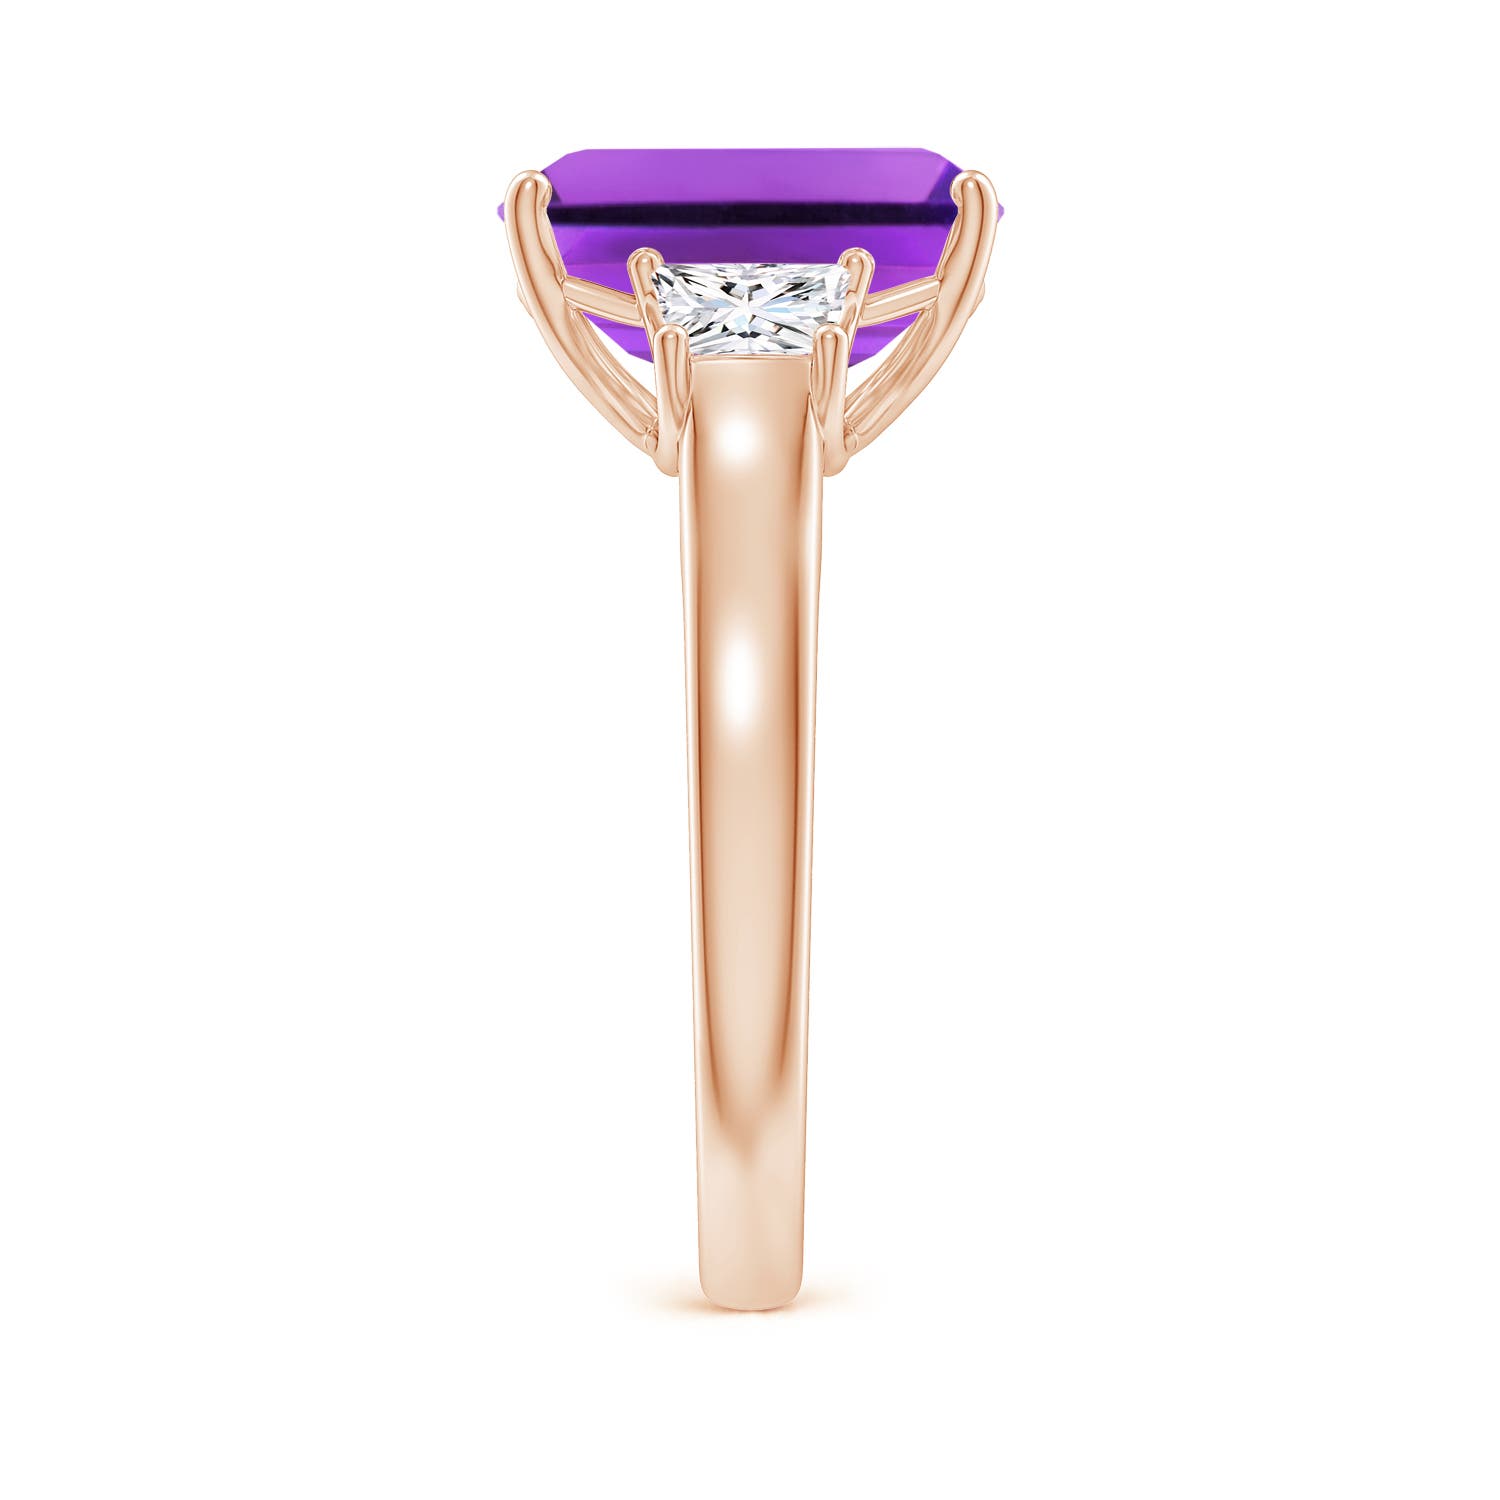 AAA- Amethyst / 4.32 CT / 14 KT Rose Gold